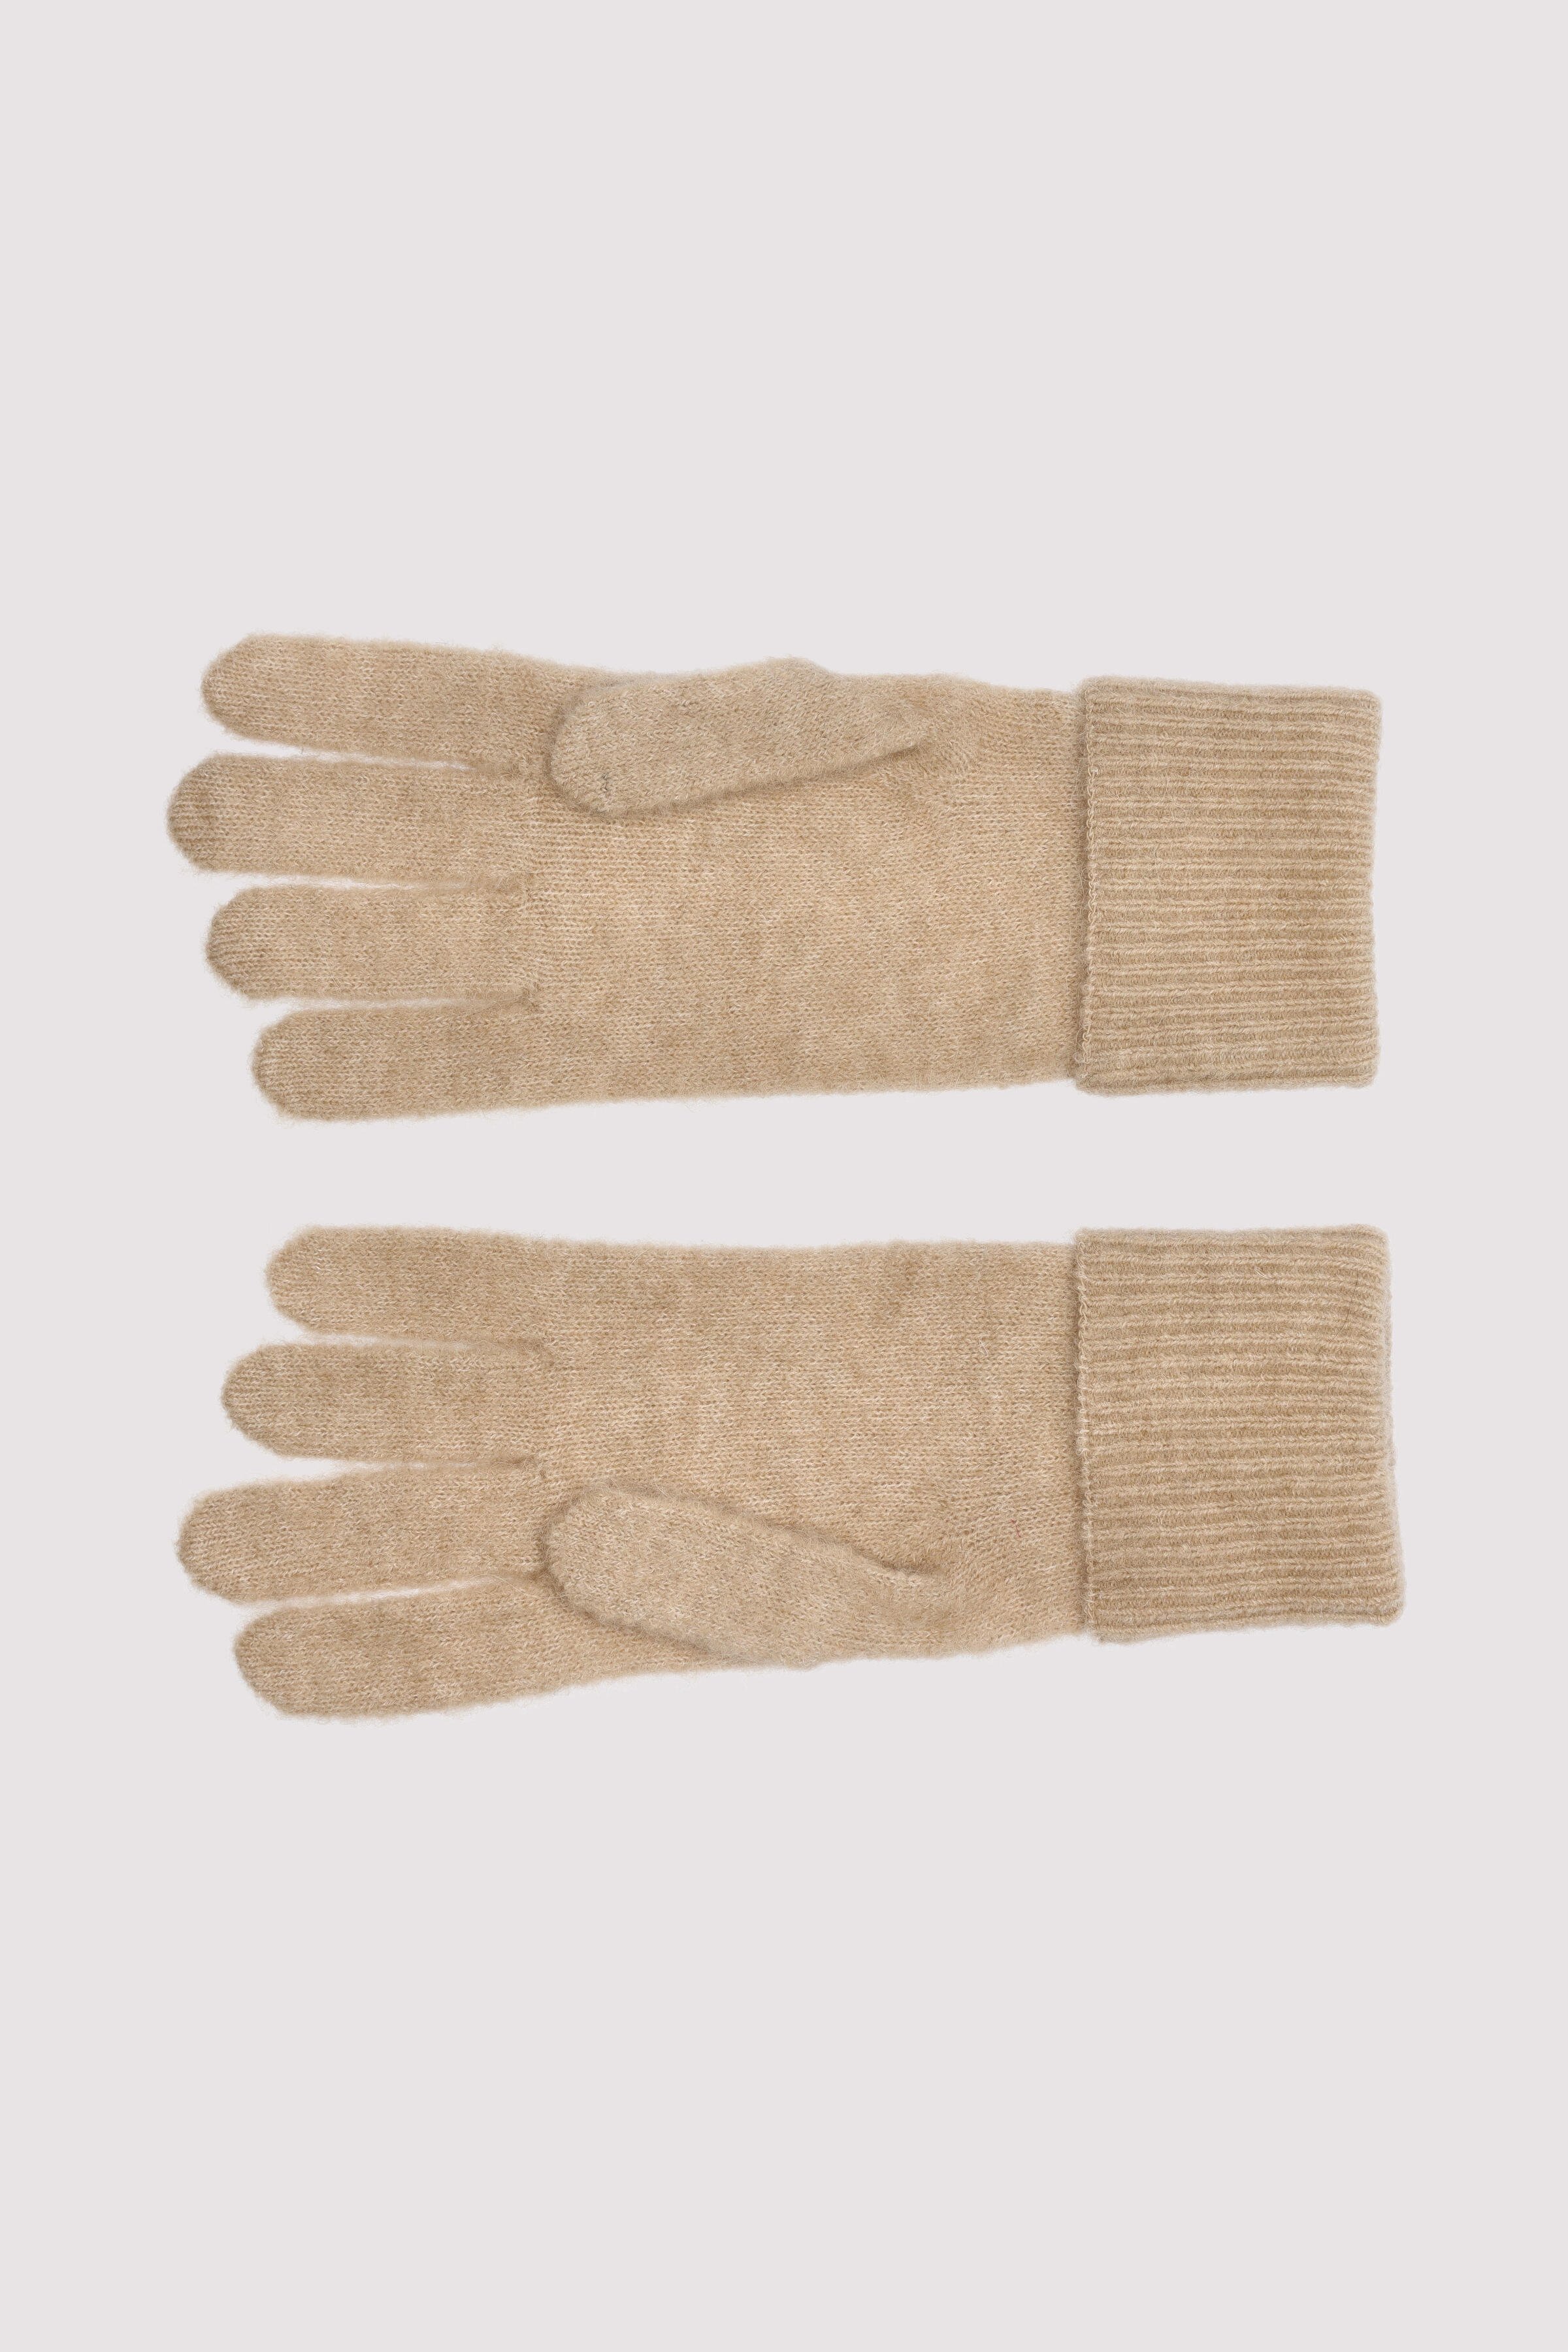 Gloves, knitted, fold-up in ha